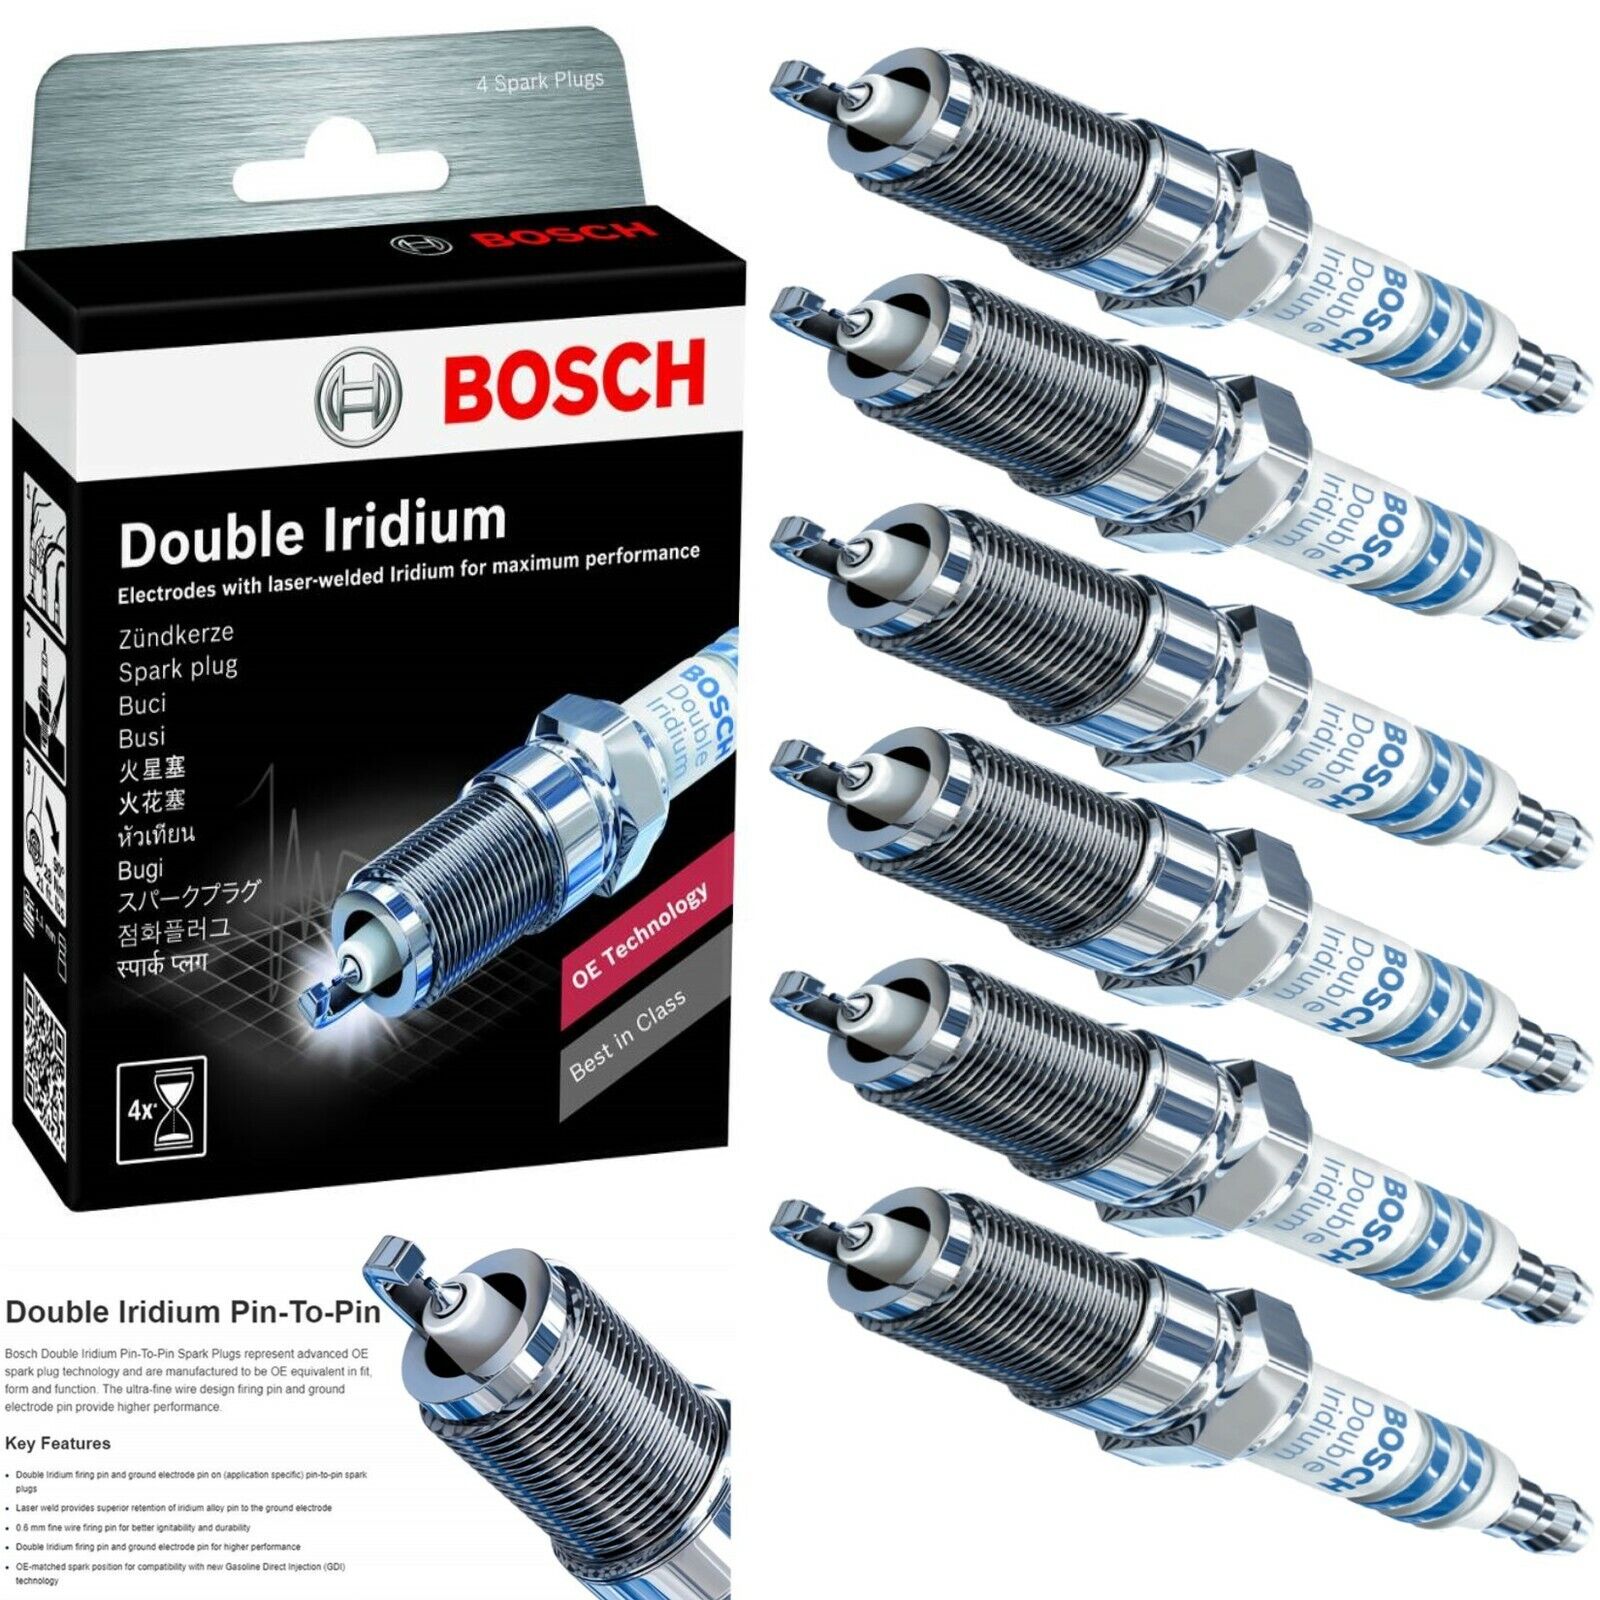 6 New Bosch Double Platinum Spark Plugs For 1988-1991 TOYOTA CAMRY V6-2.5L